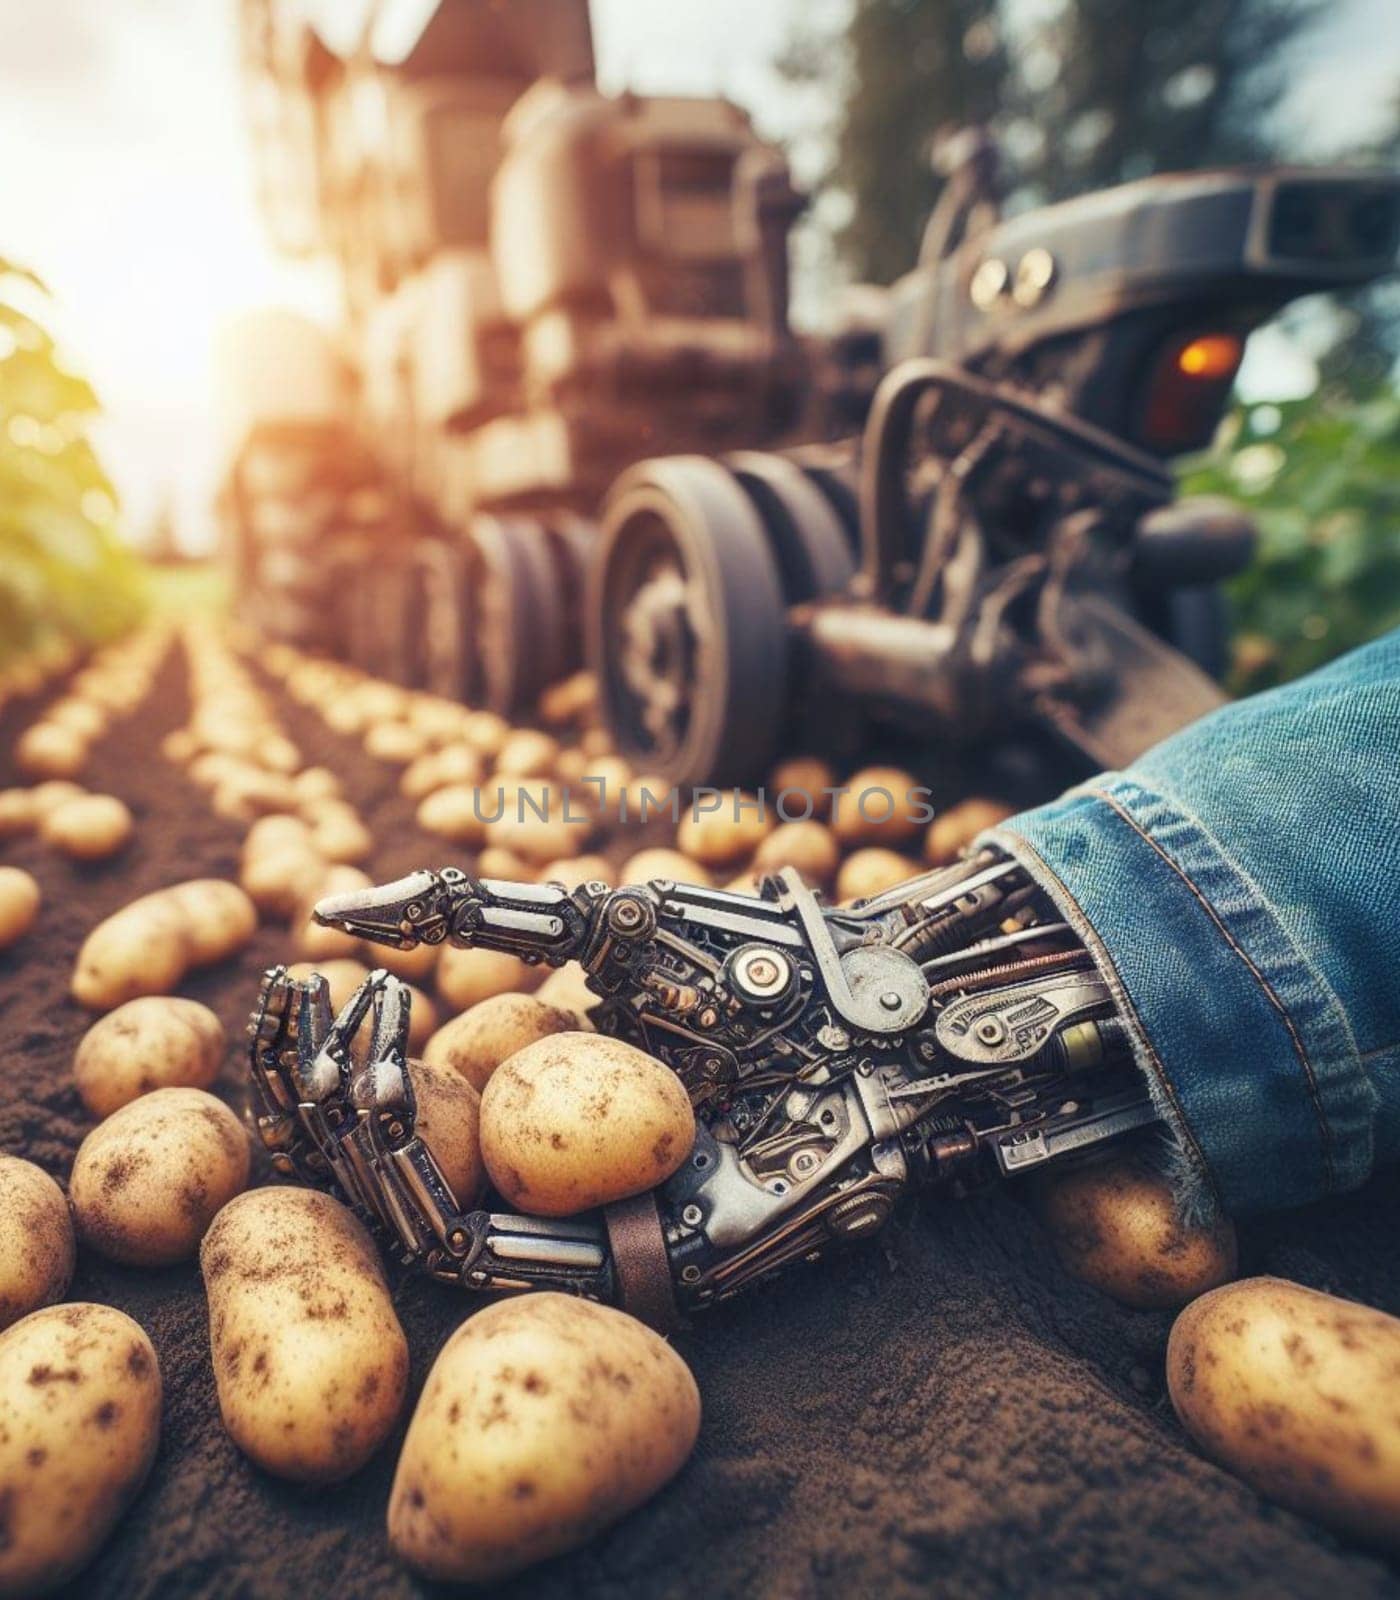 robot working in the farm vegetable garden to grow produce for human consumption by verbano